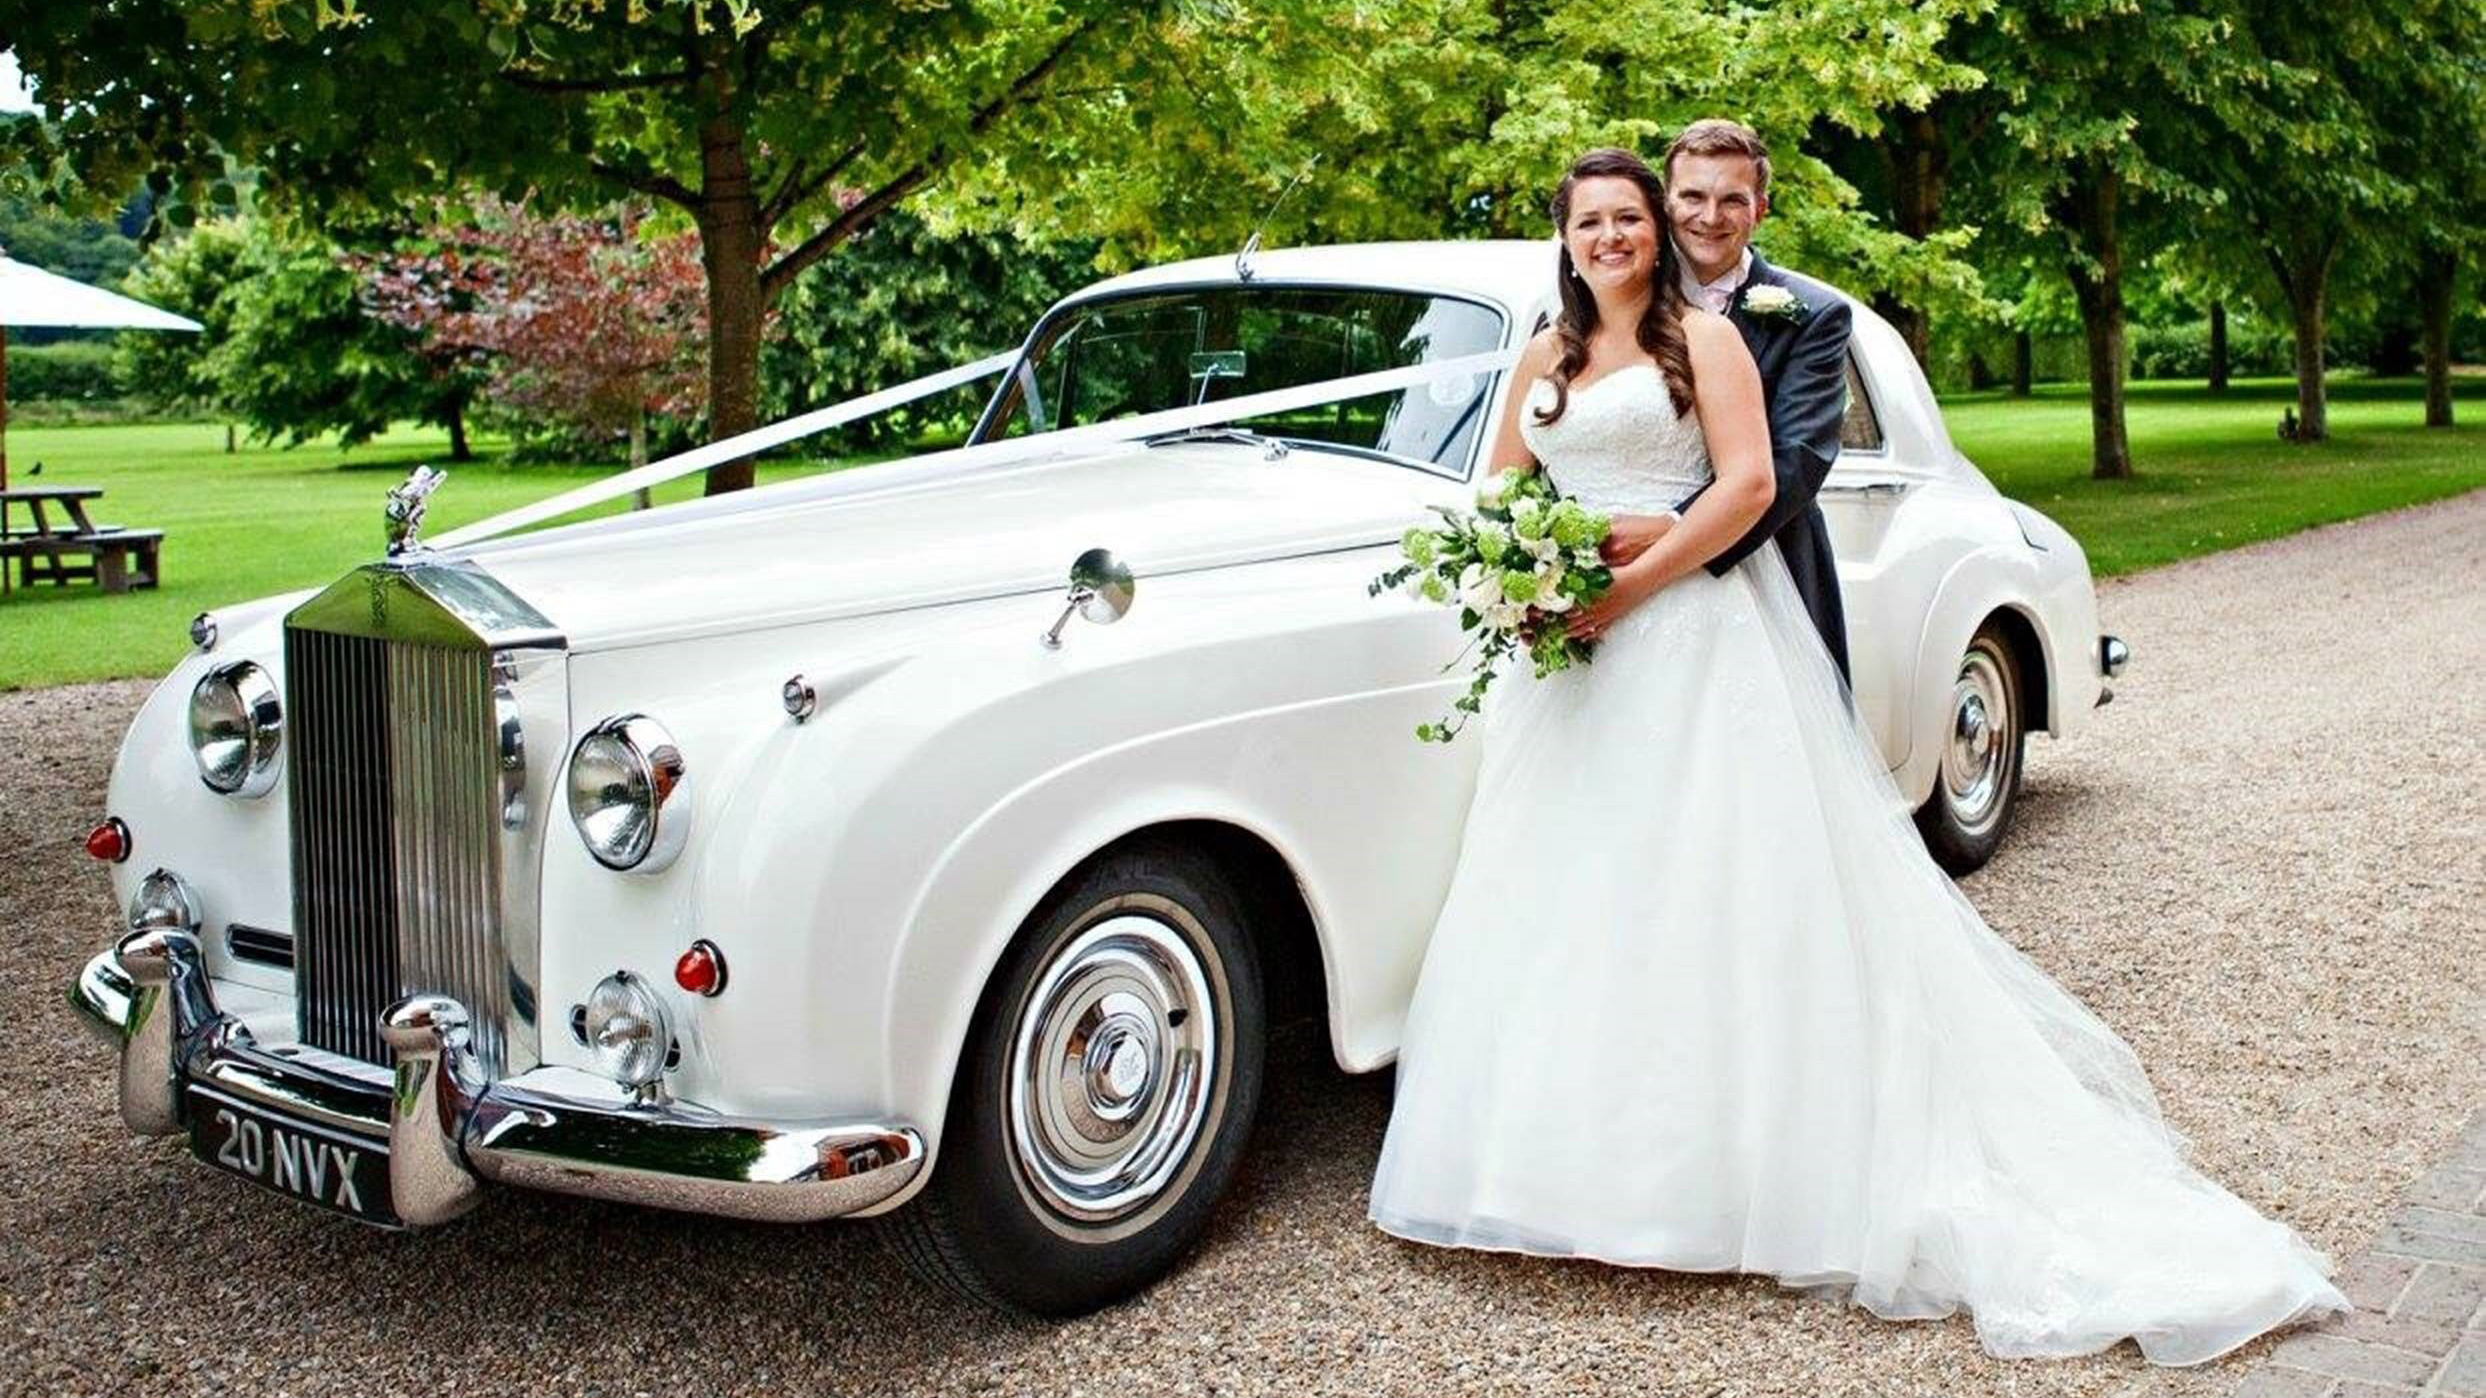 White Rolls-Royce Silver cloud decorated with ivory ribbons parked in the entrance of a wedding venue in Houghton Regis. Bride and Groom are standing by the vehicle. Groom is holding his Bride in his arms while she holds her bridal bouquet.